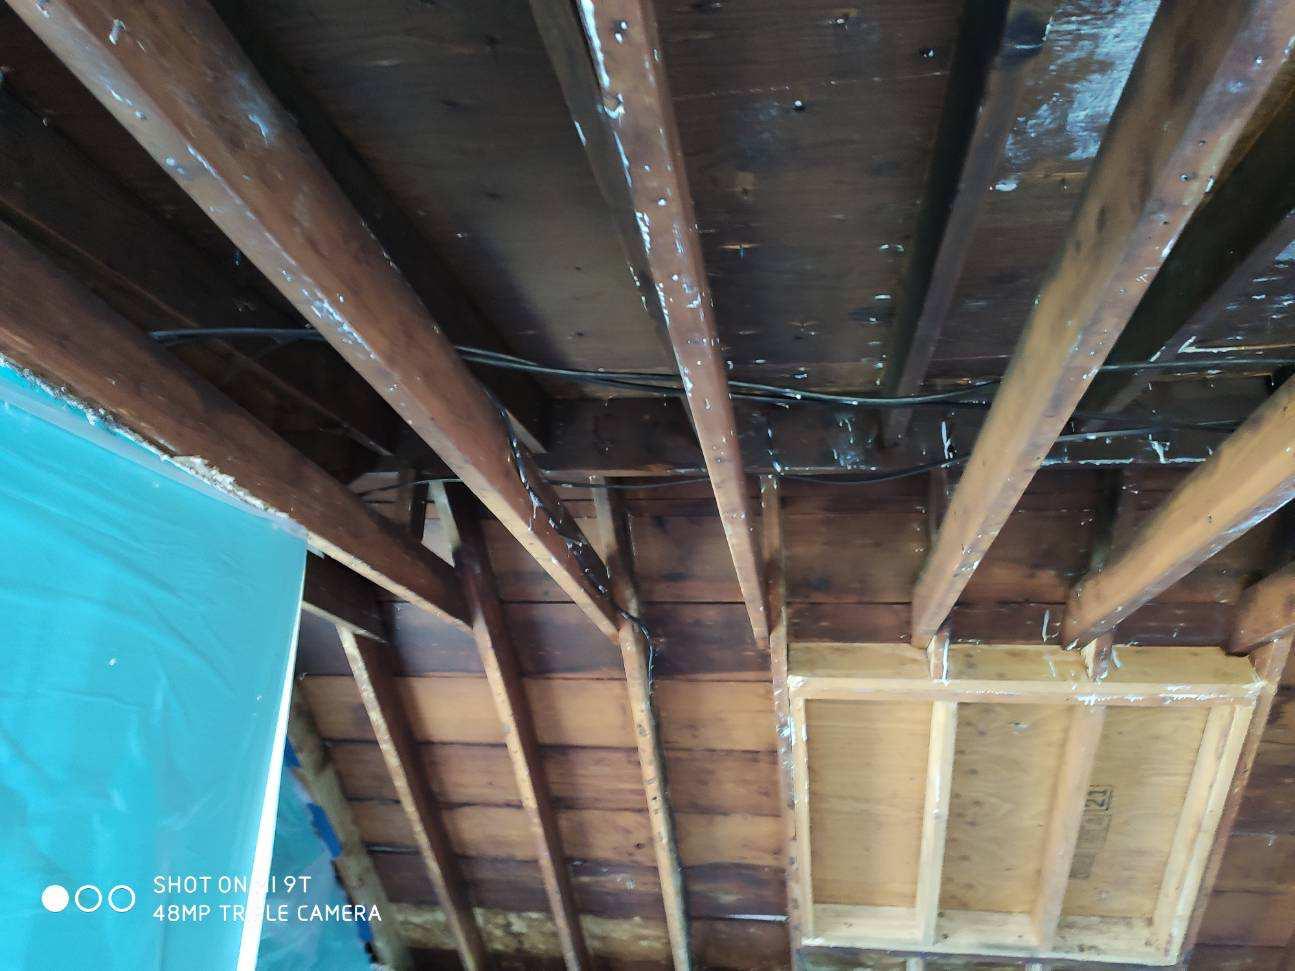 Mold in your attic? That's ok, call SERVPRO of North East Chester County